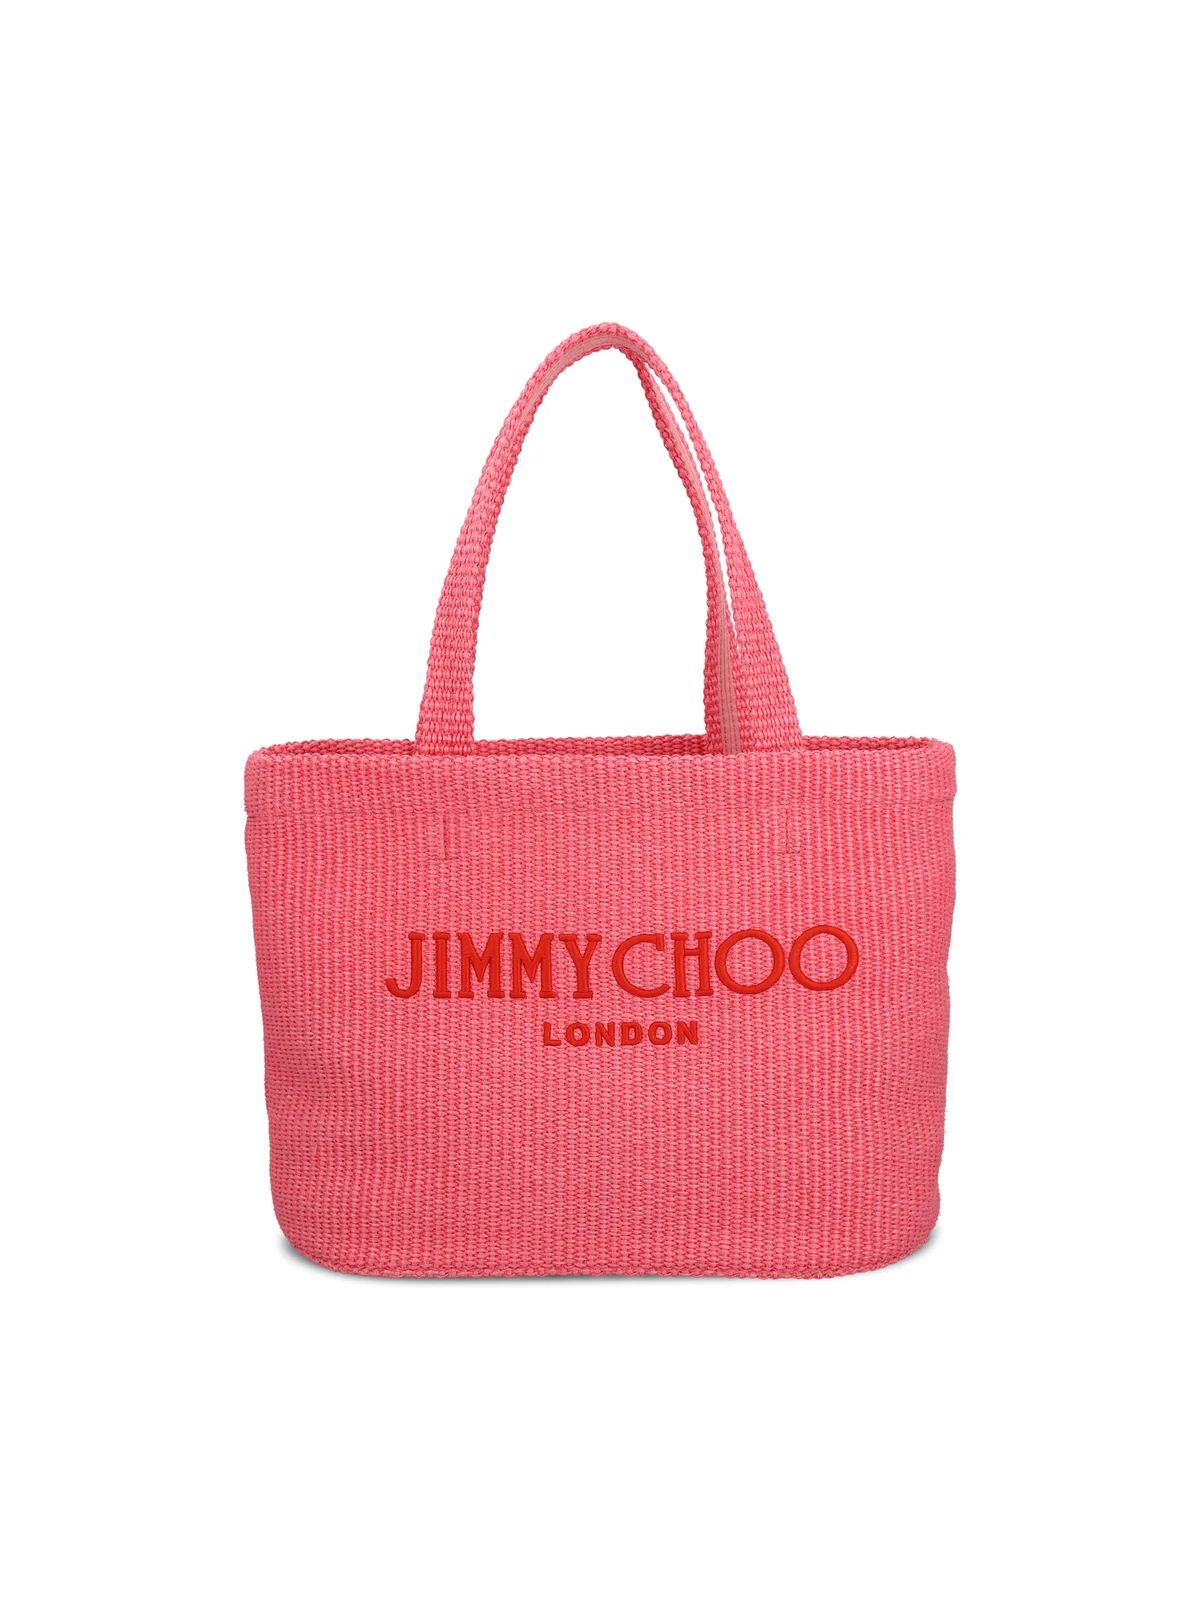 Jimmy Choo Logo Embroidered Woven Tote Bag | Cettire Global